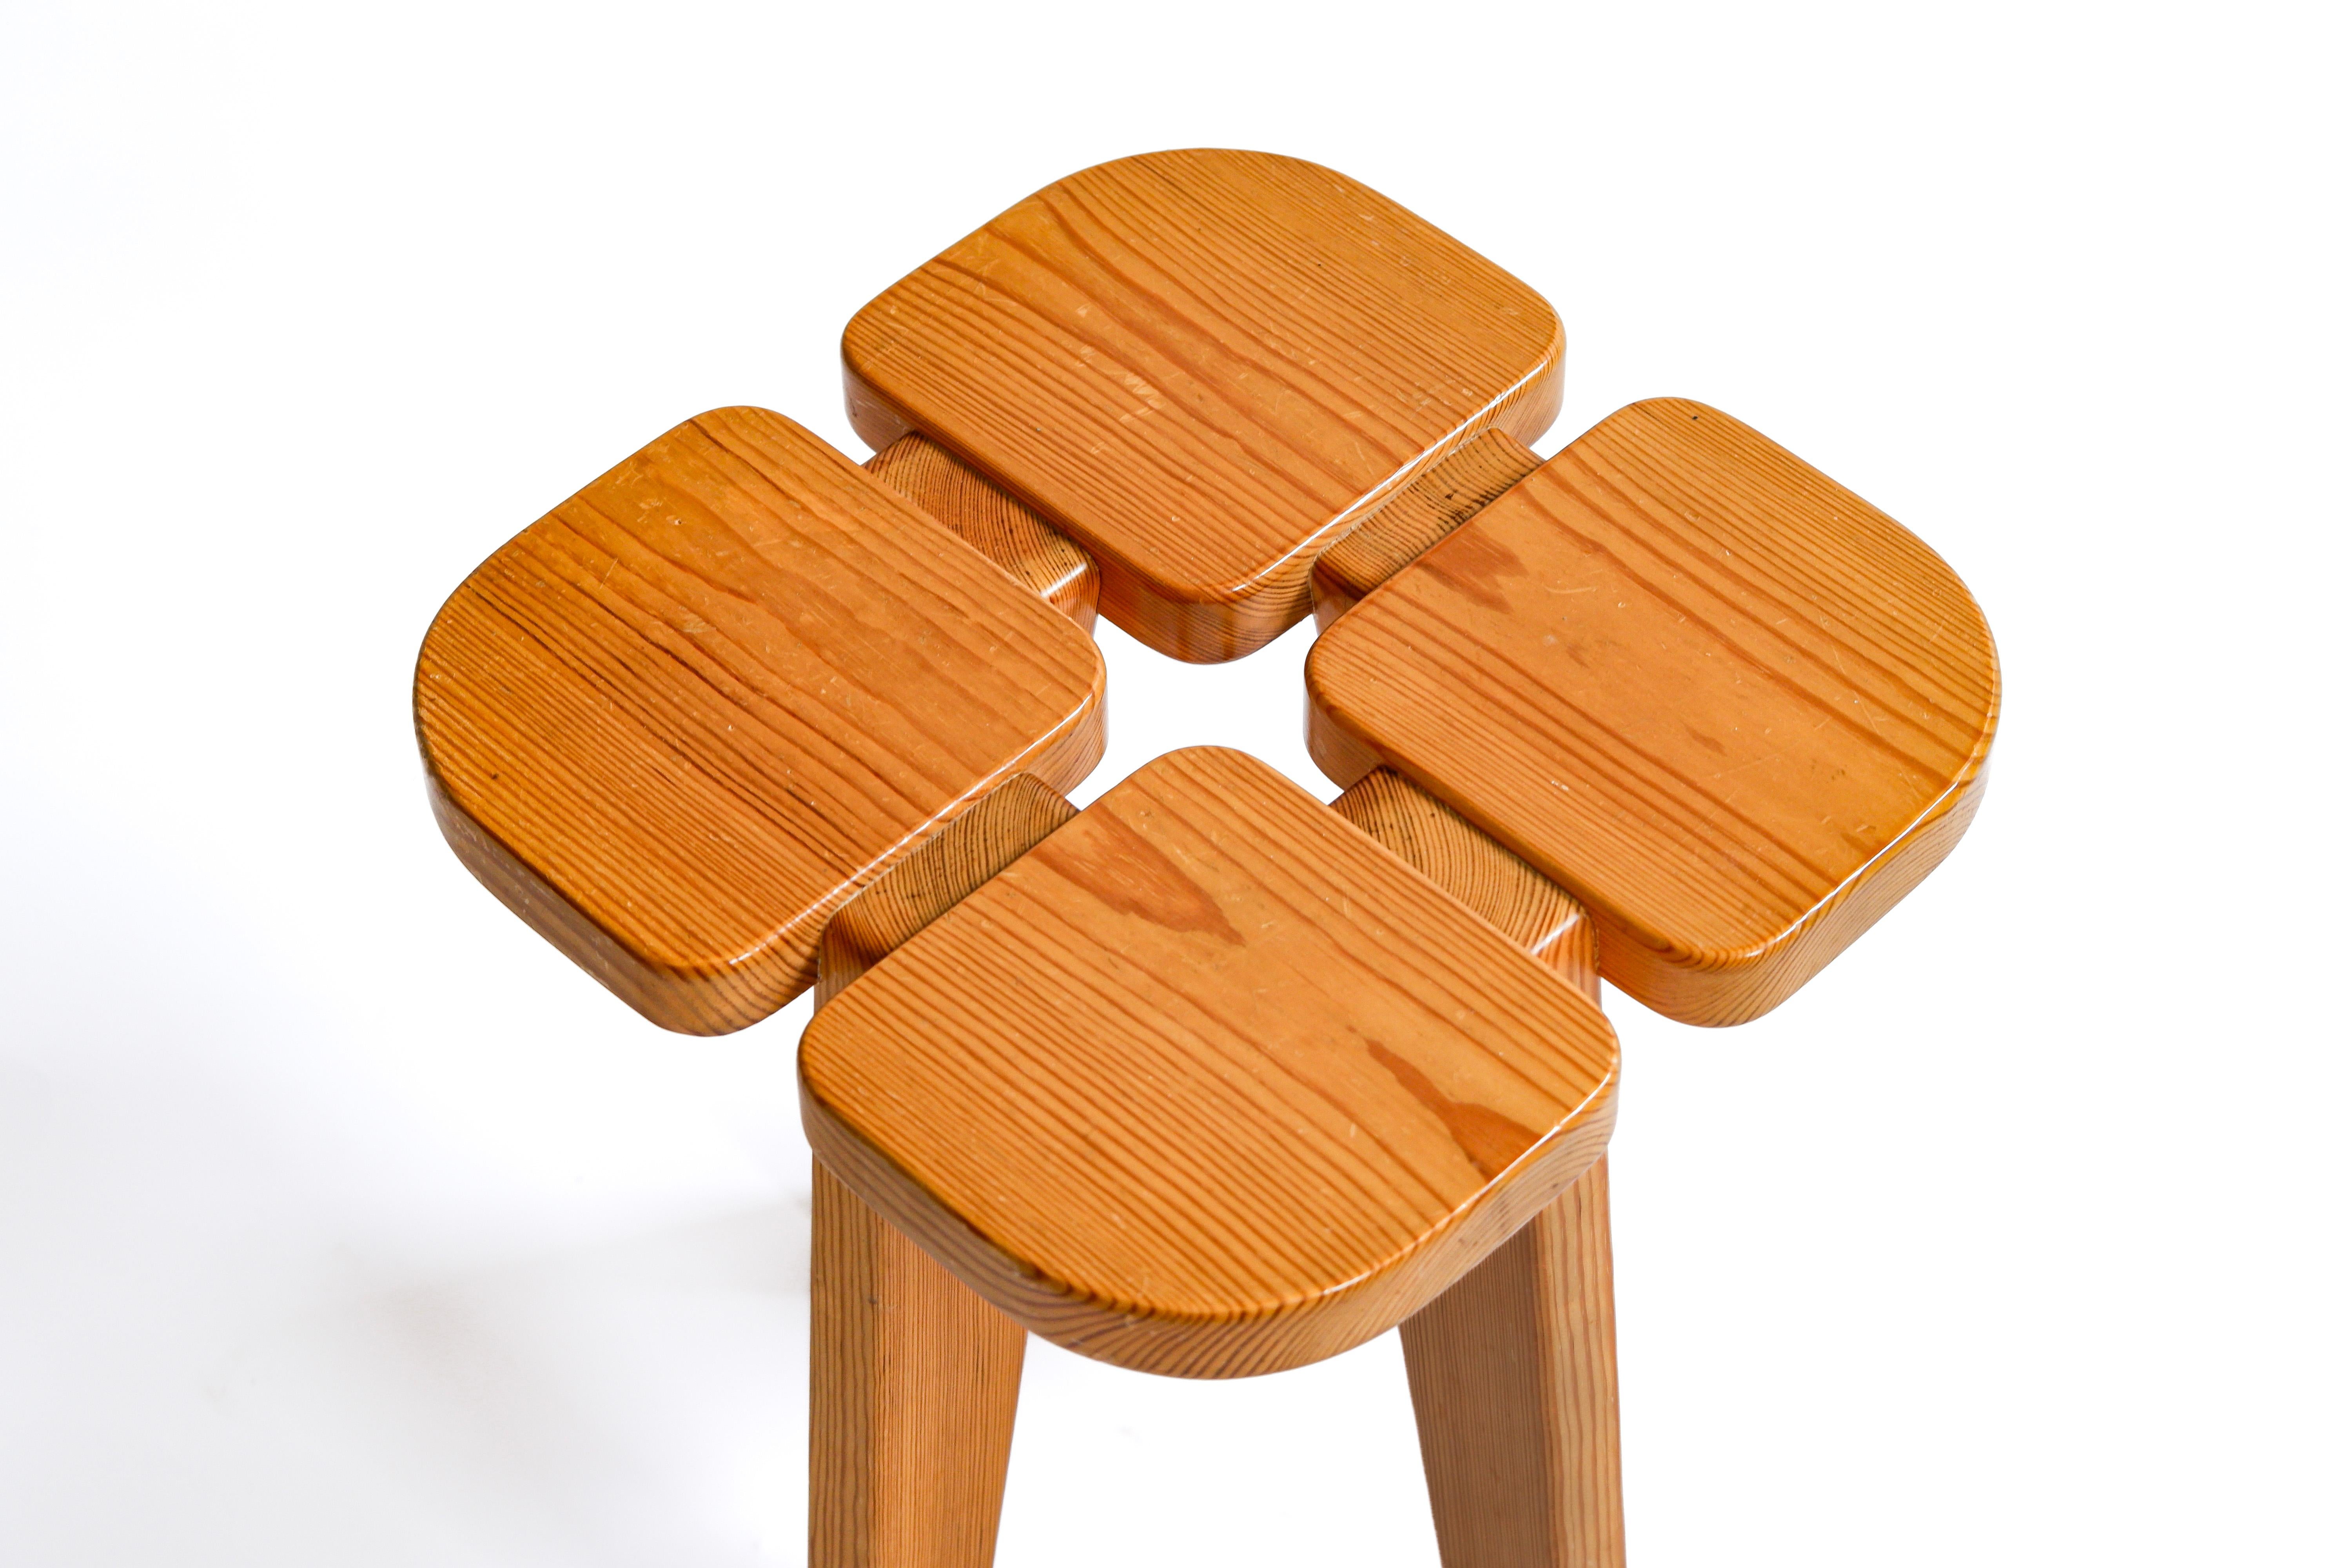 Lisa Johansson-Pape, Apila stool, made in solid pine circa 1960, produced by Stockmann Oy in Finland. Good vintage condition. Lisa Johansson-Pape is one of the most talented finnish design of her time along side Alvar Aalto or Paavo tynell in